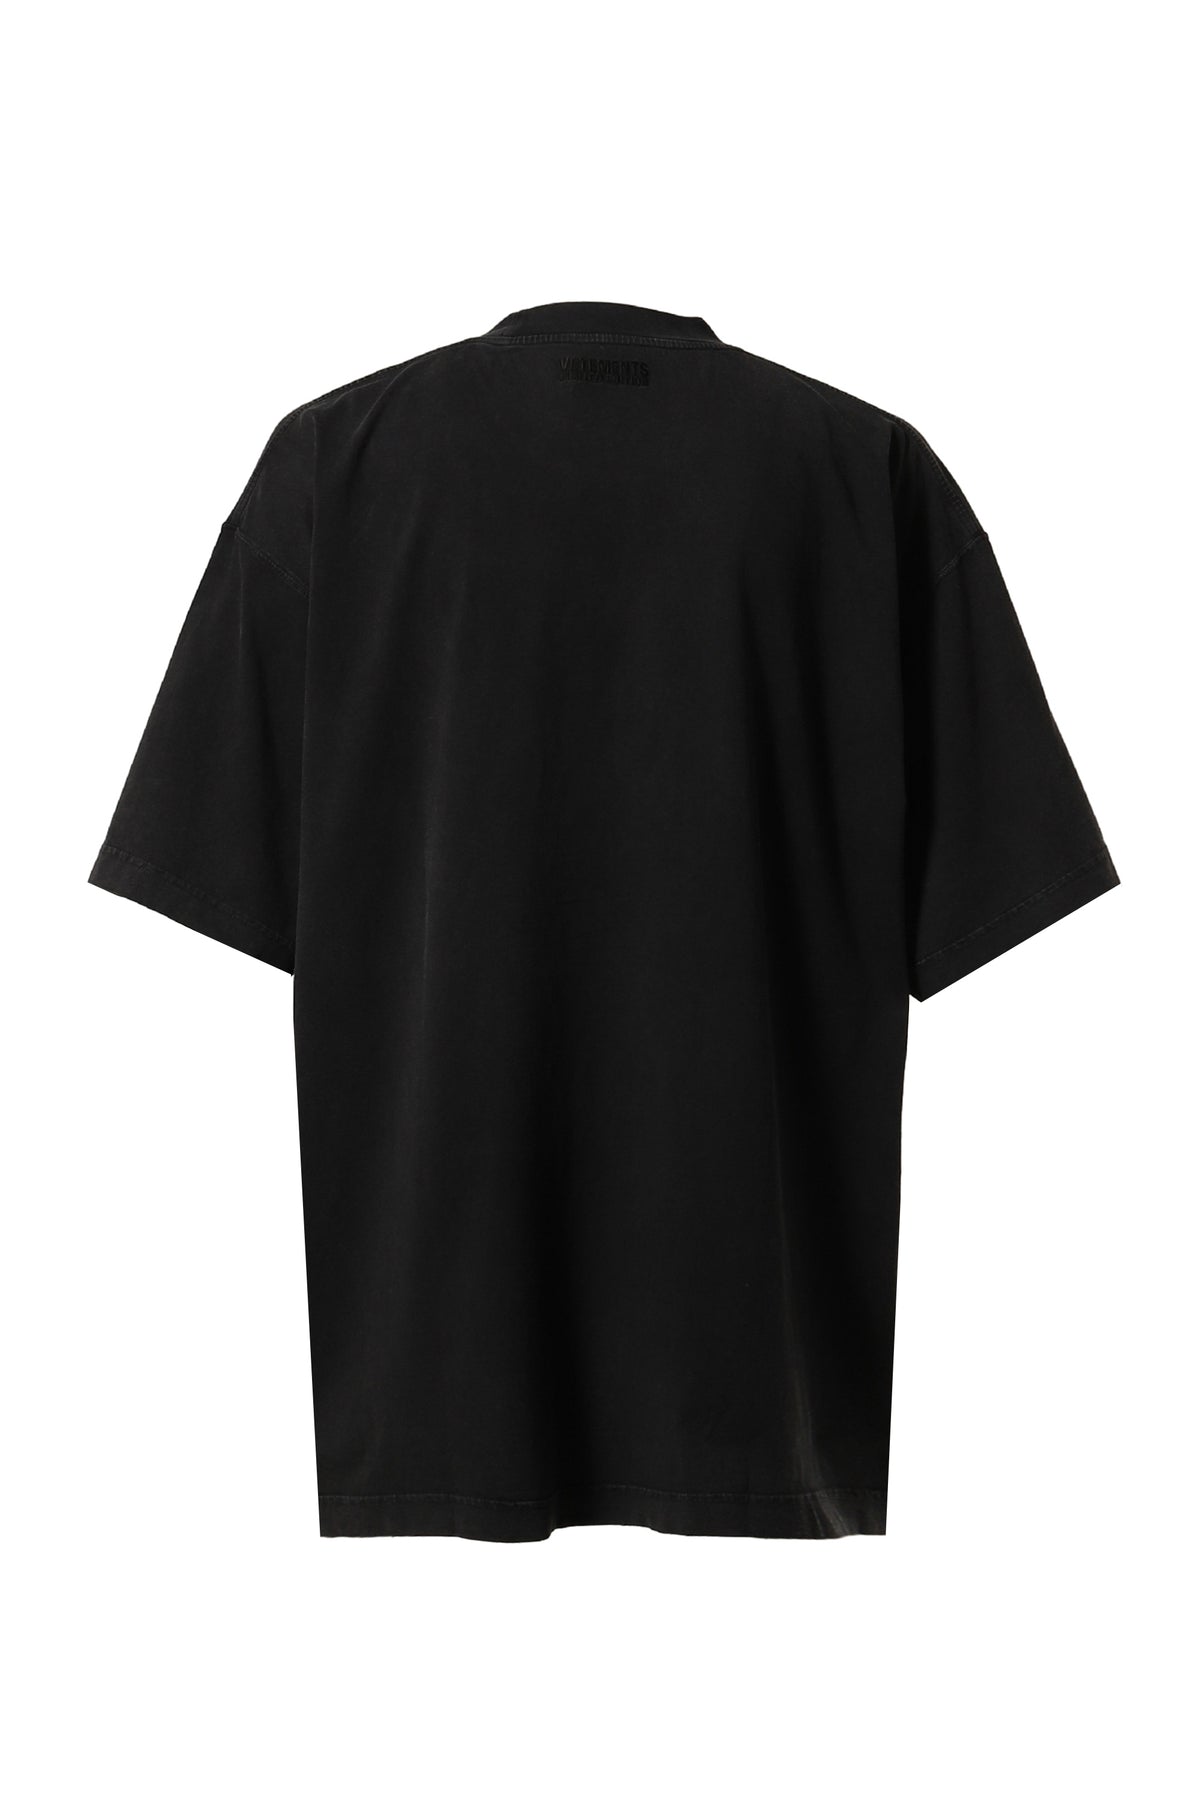 VERY EXPENSIVE T-SHIRT / WASHED BLK